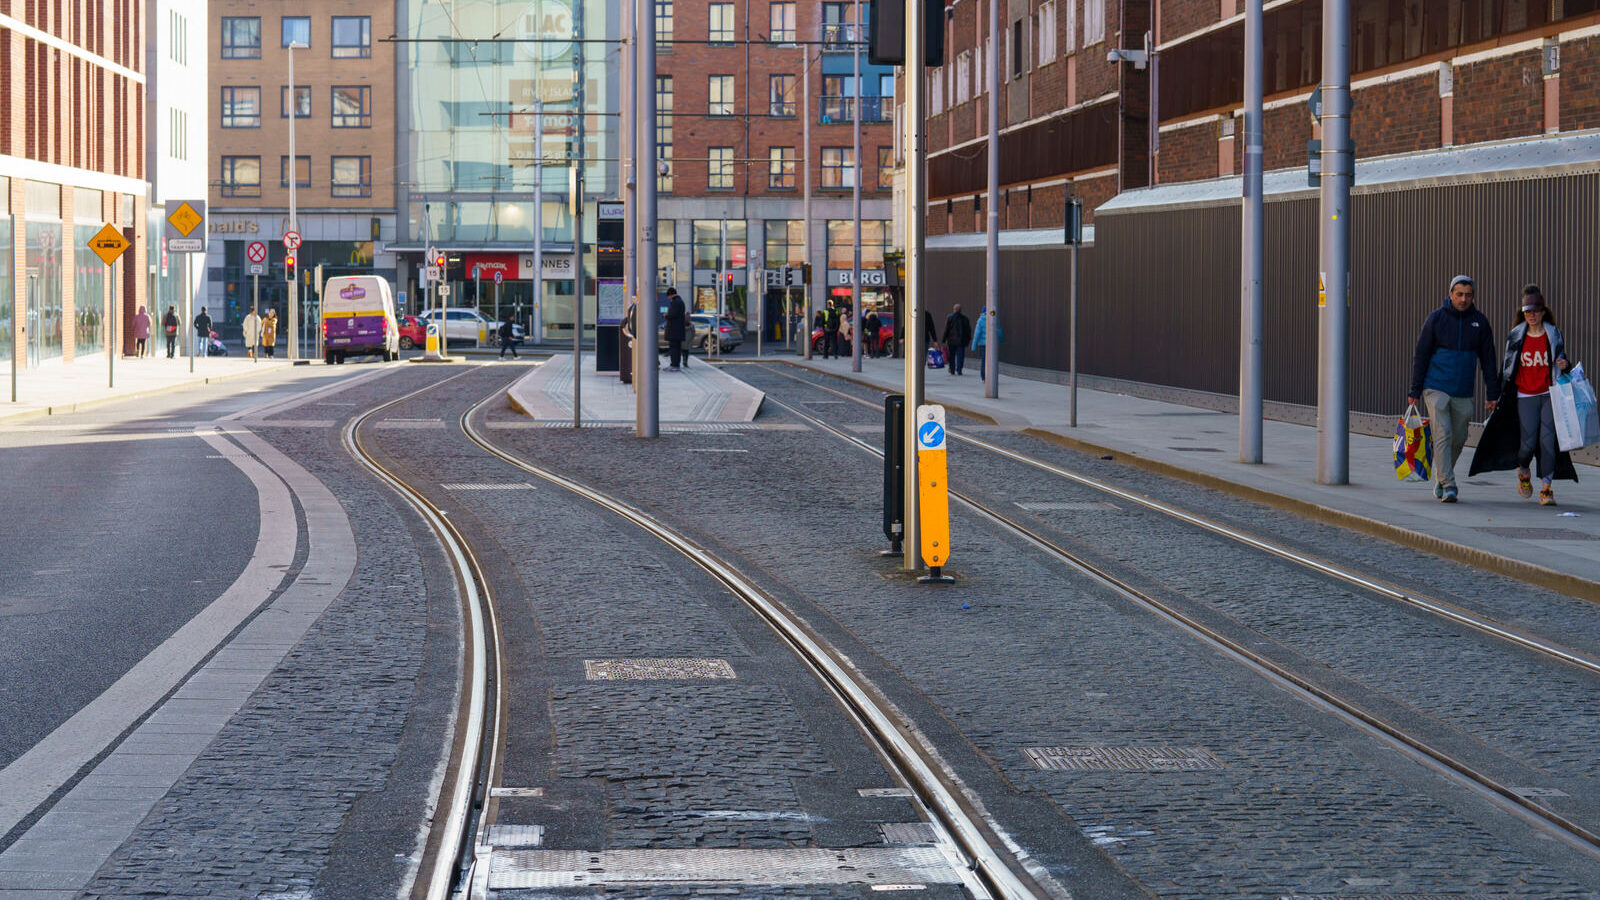 LUAS TRAM STOP AT LOWER DOMINICK STREET [AT THE MOMENT THE AREA DOES FEEL SAFER]-228689-1